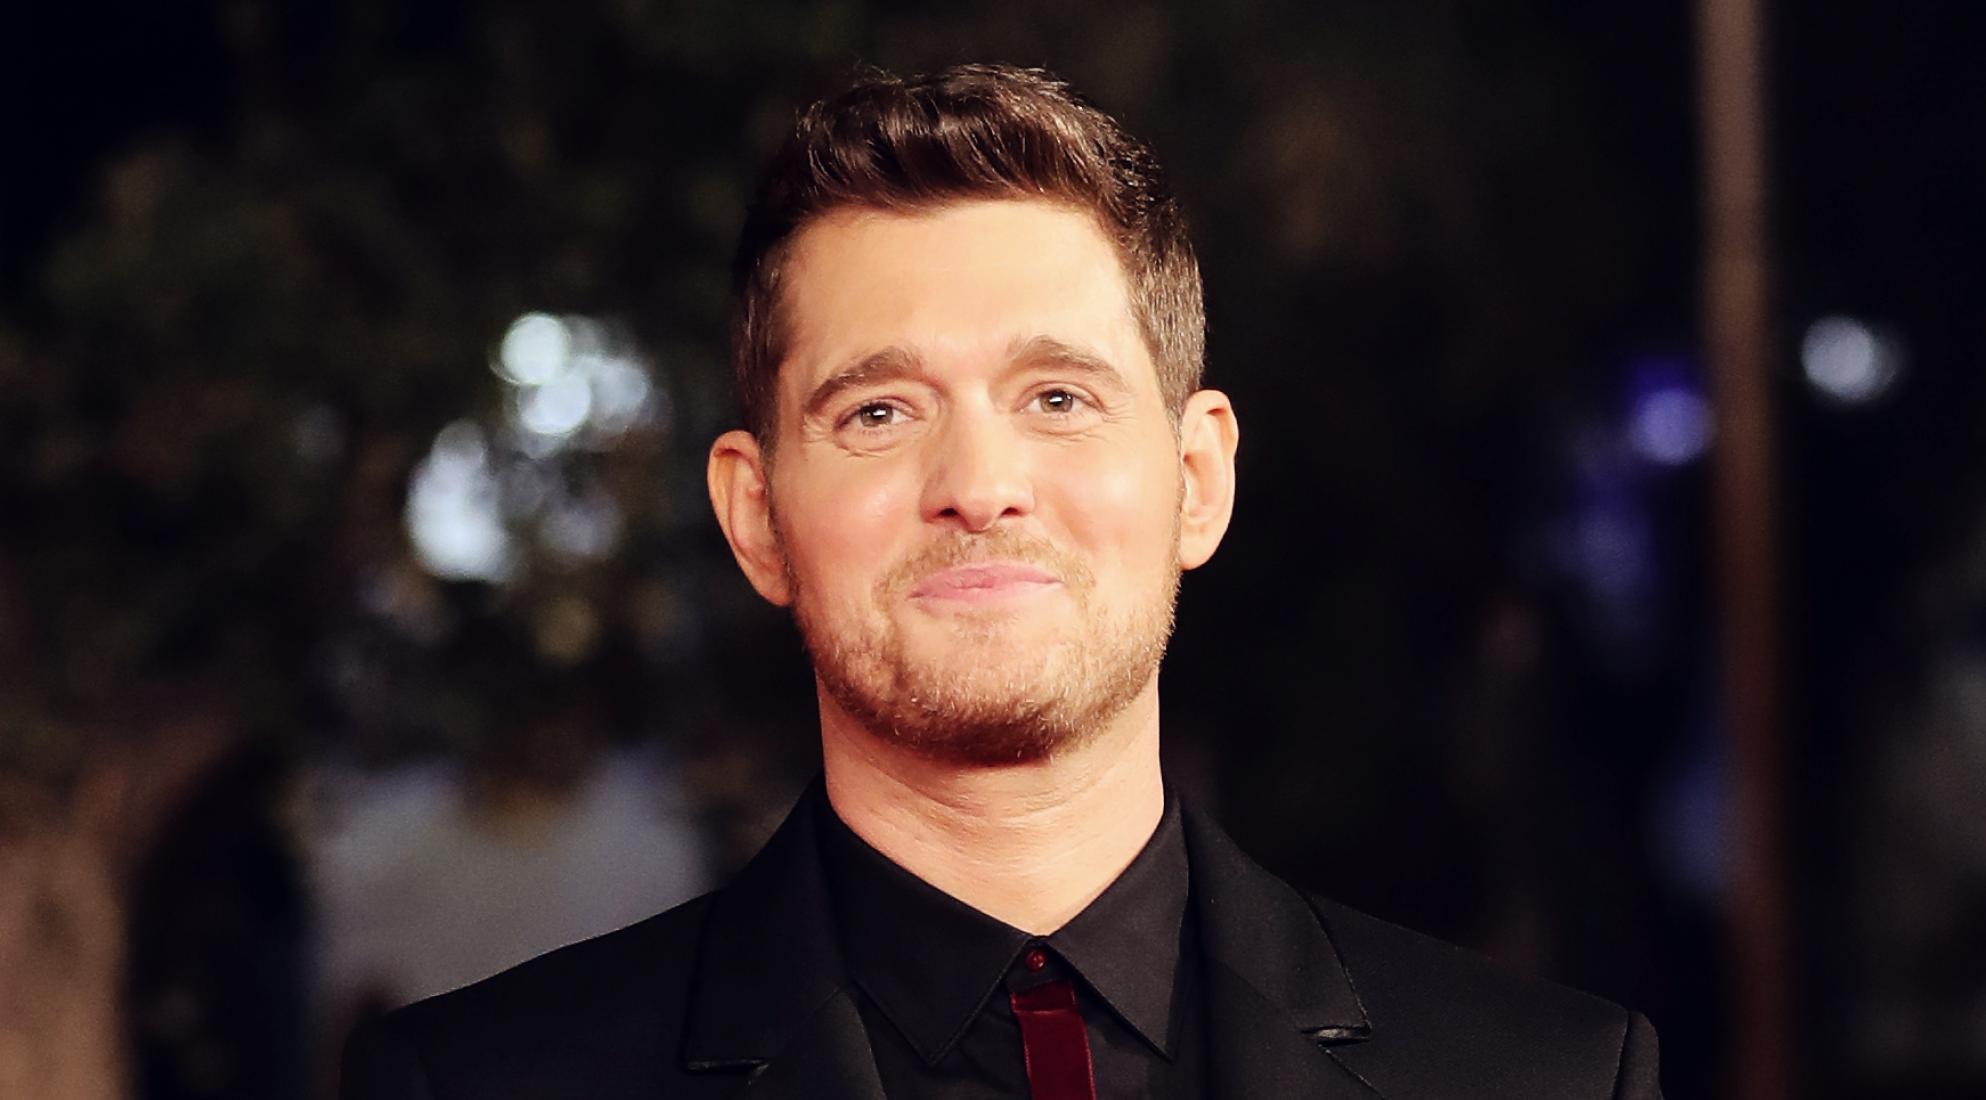 Where's Michael Buble today? 